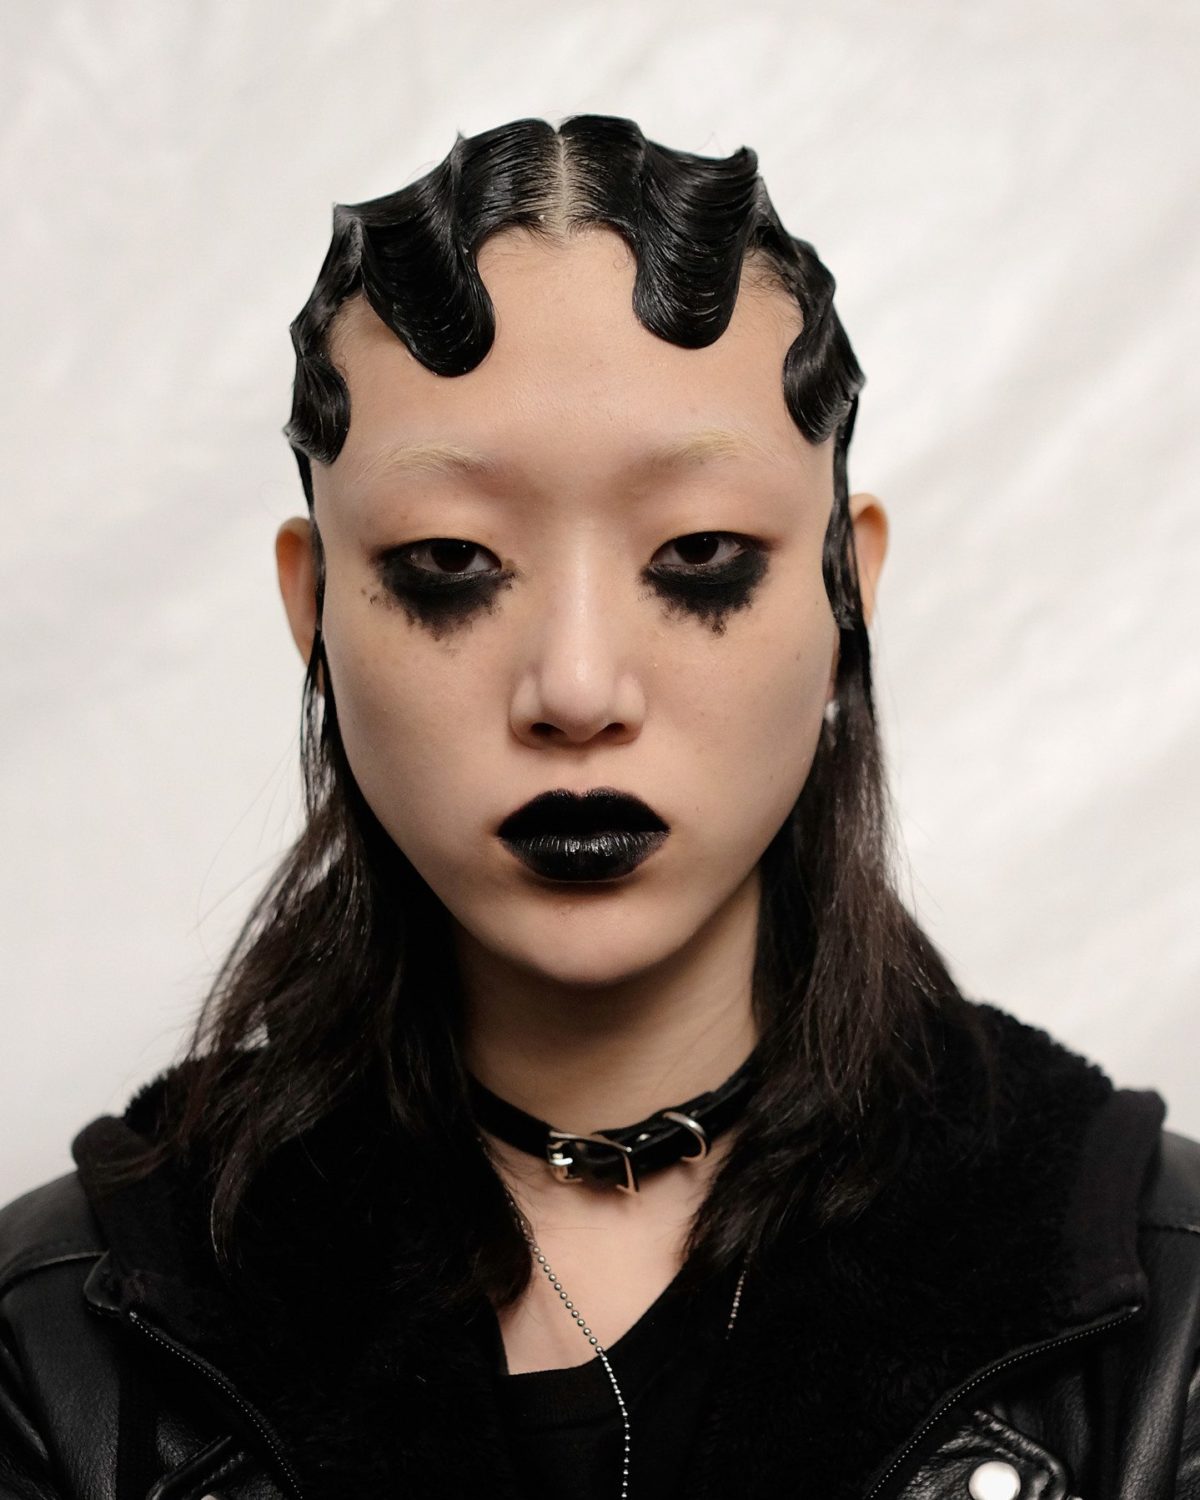 Why Do We Have a Never-Ending Fascination With Goth Makeup? 